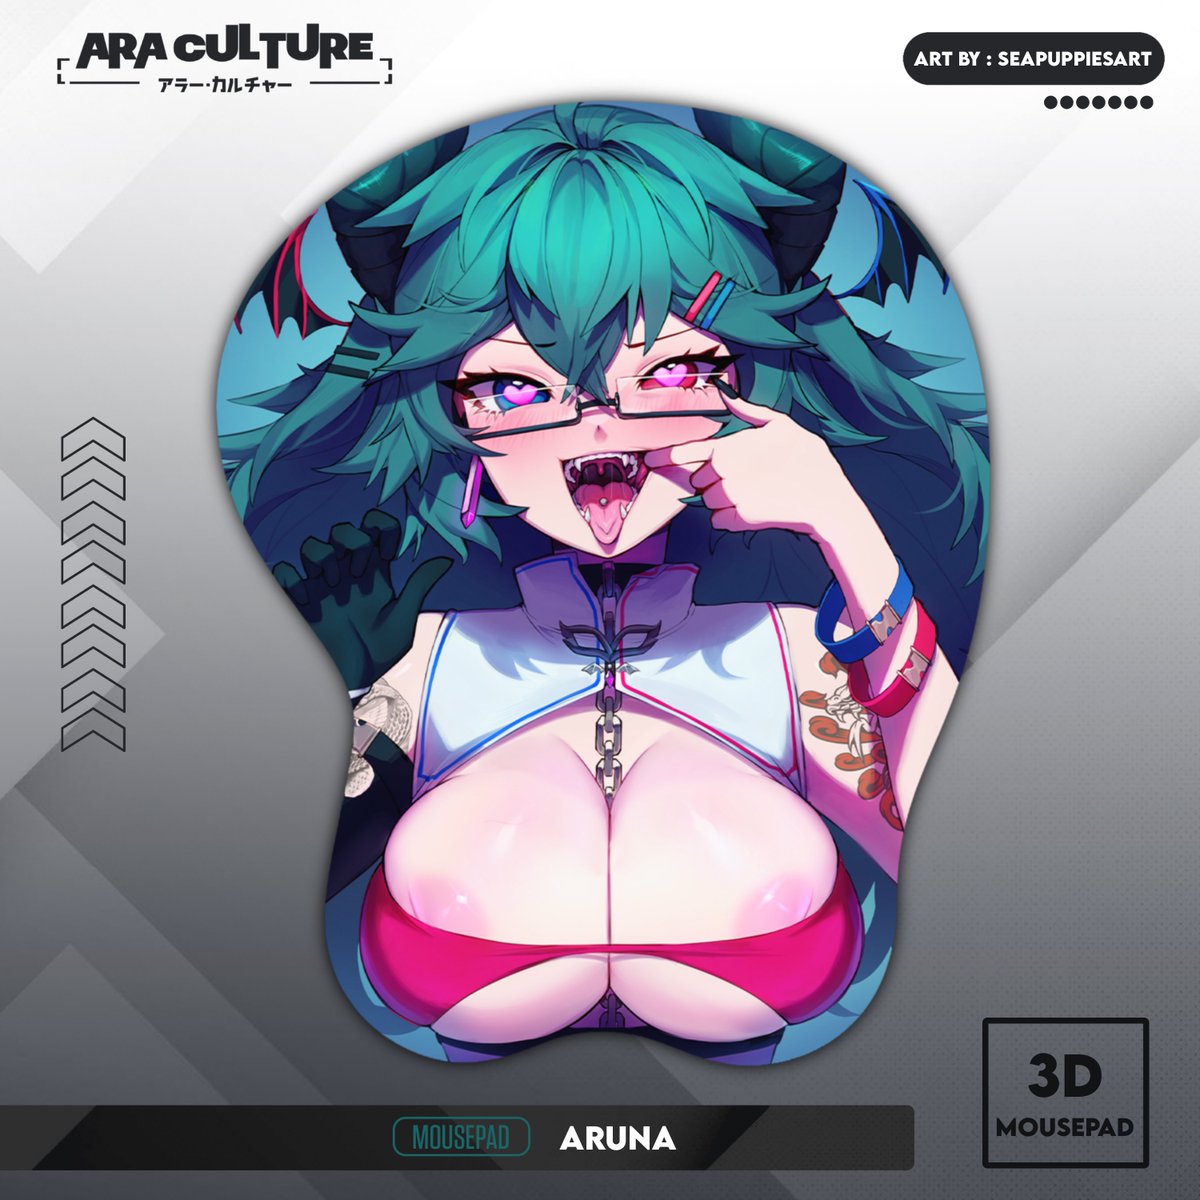 ↳『 💙Aruna 3D Mousepad❤️』
✧
Happy Mother’s Day everyone! First reveal for the next drop is this stunning 3D mousepad of @arunareaver The artist we worked with absolutely killed it, we can’t wait for this to be available in shop! What other products would you like to see with…